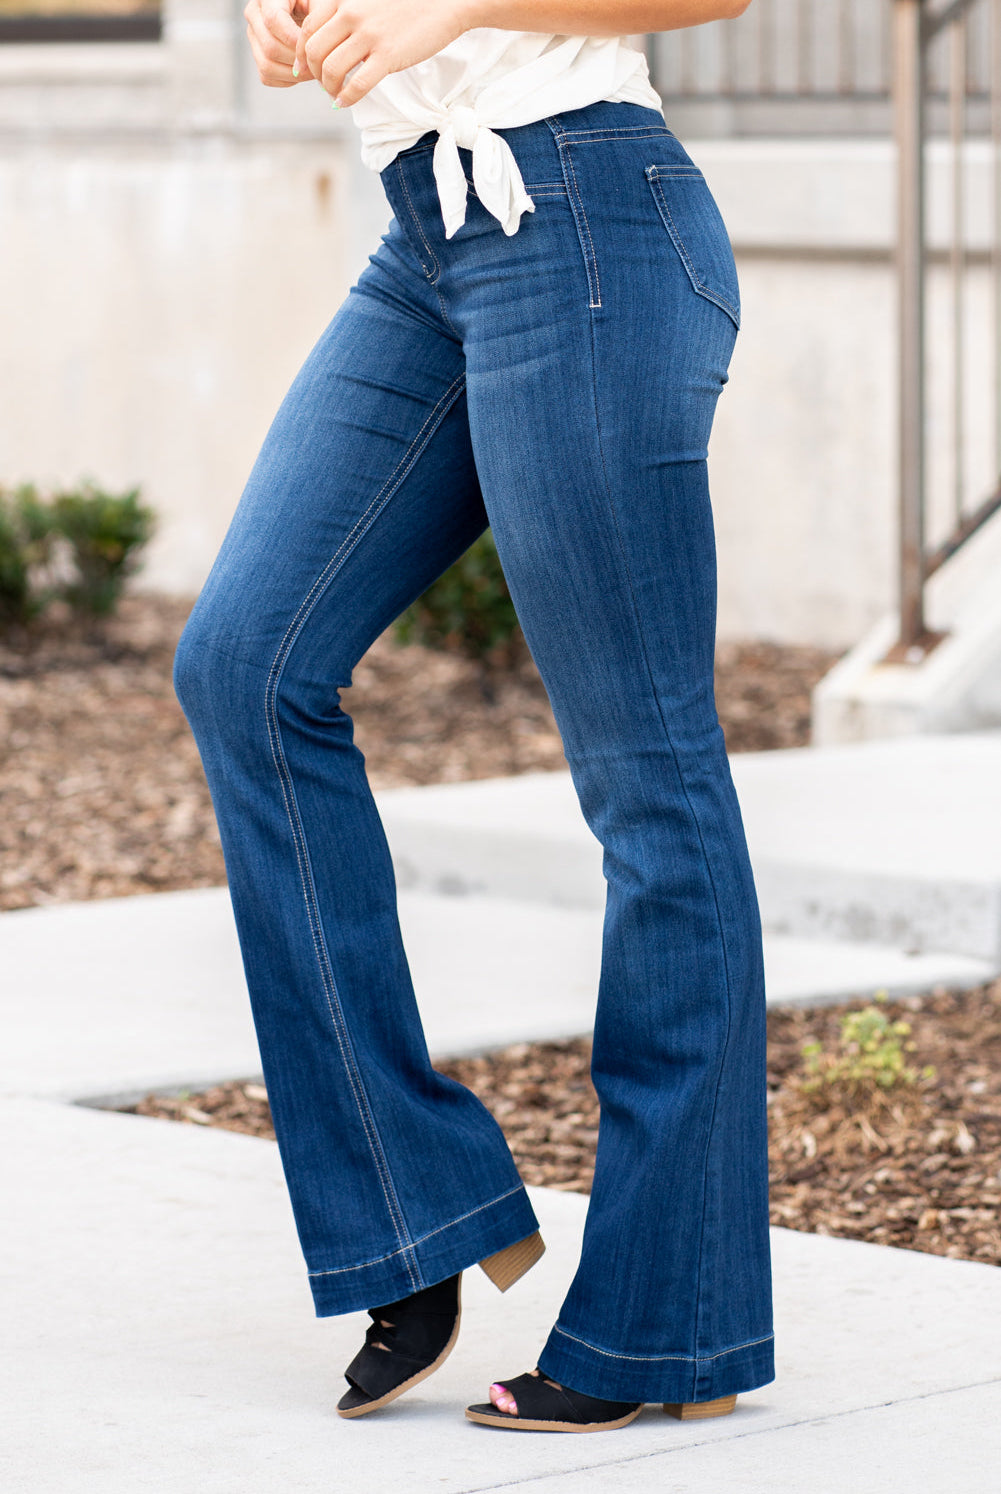 Cello Jeans Get comfortable and trendy in these ultra stretchy jeans. The dark wash flared jegging features a flattering flared fit, a faded wash, and light whisker detail. Additionally it has two faux front pockets and two back real pockets. Collection: Spring 2021 Pull On Flare  Color: Dark Blue Wash  Cut: Flare, 33" Inseam Rise: Mid Rise, 8.5" Front Rise 57% Cotton 26.4% Polyester 14.2% Rayon 2.4% Spandex Fly: Zipper Style #: AB35324DK Contact us for any additional measurements or sizing.